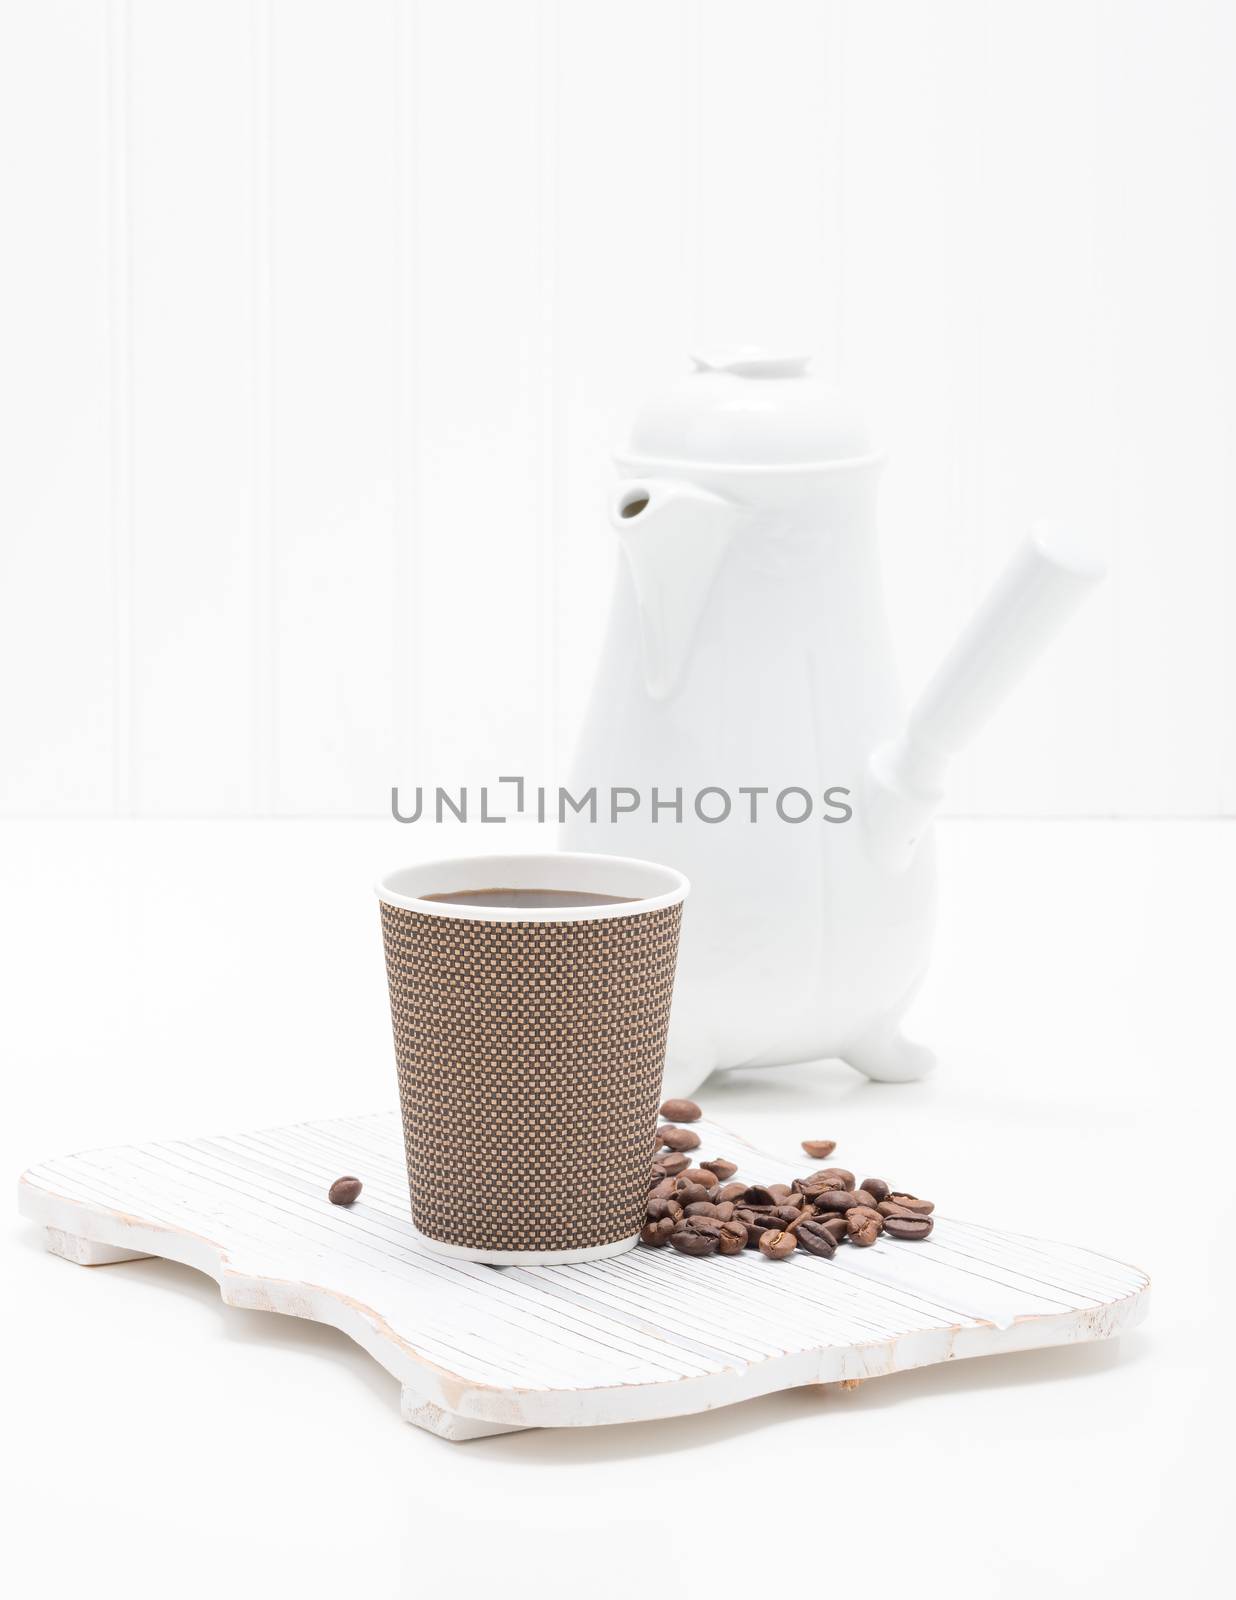 Fresh brewed coffee served in a disposable paper cup.